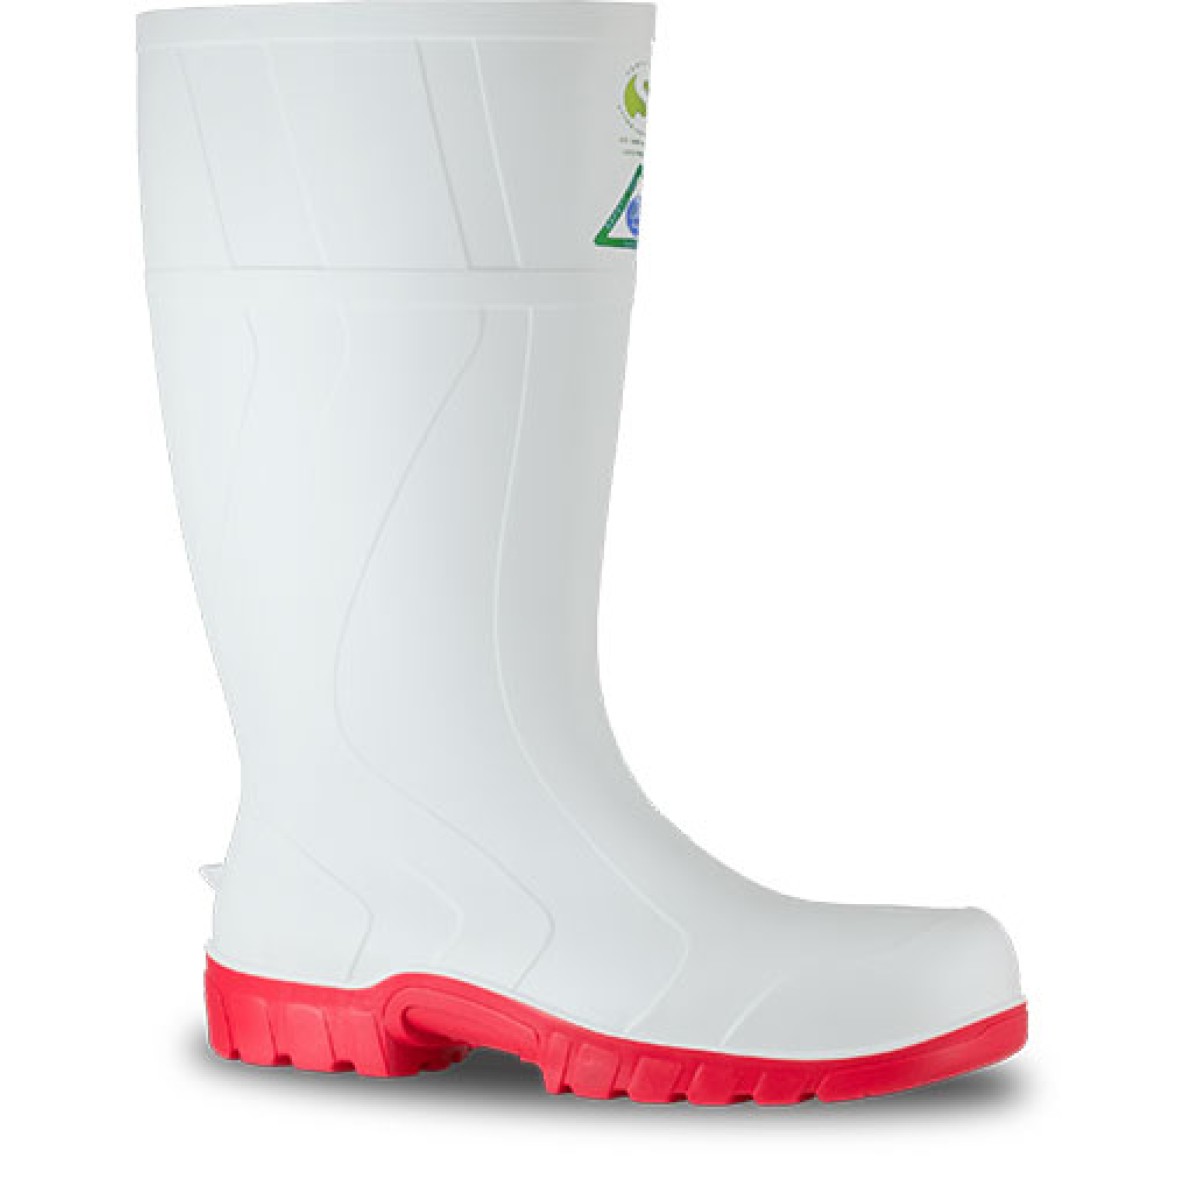 GUMBOOTS BATA SAFEMATE WHITE RED SIZE  8